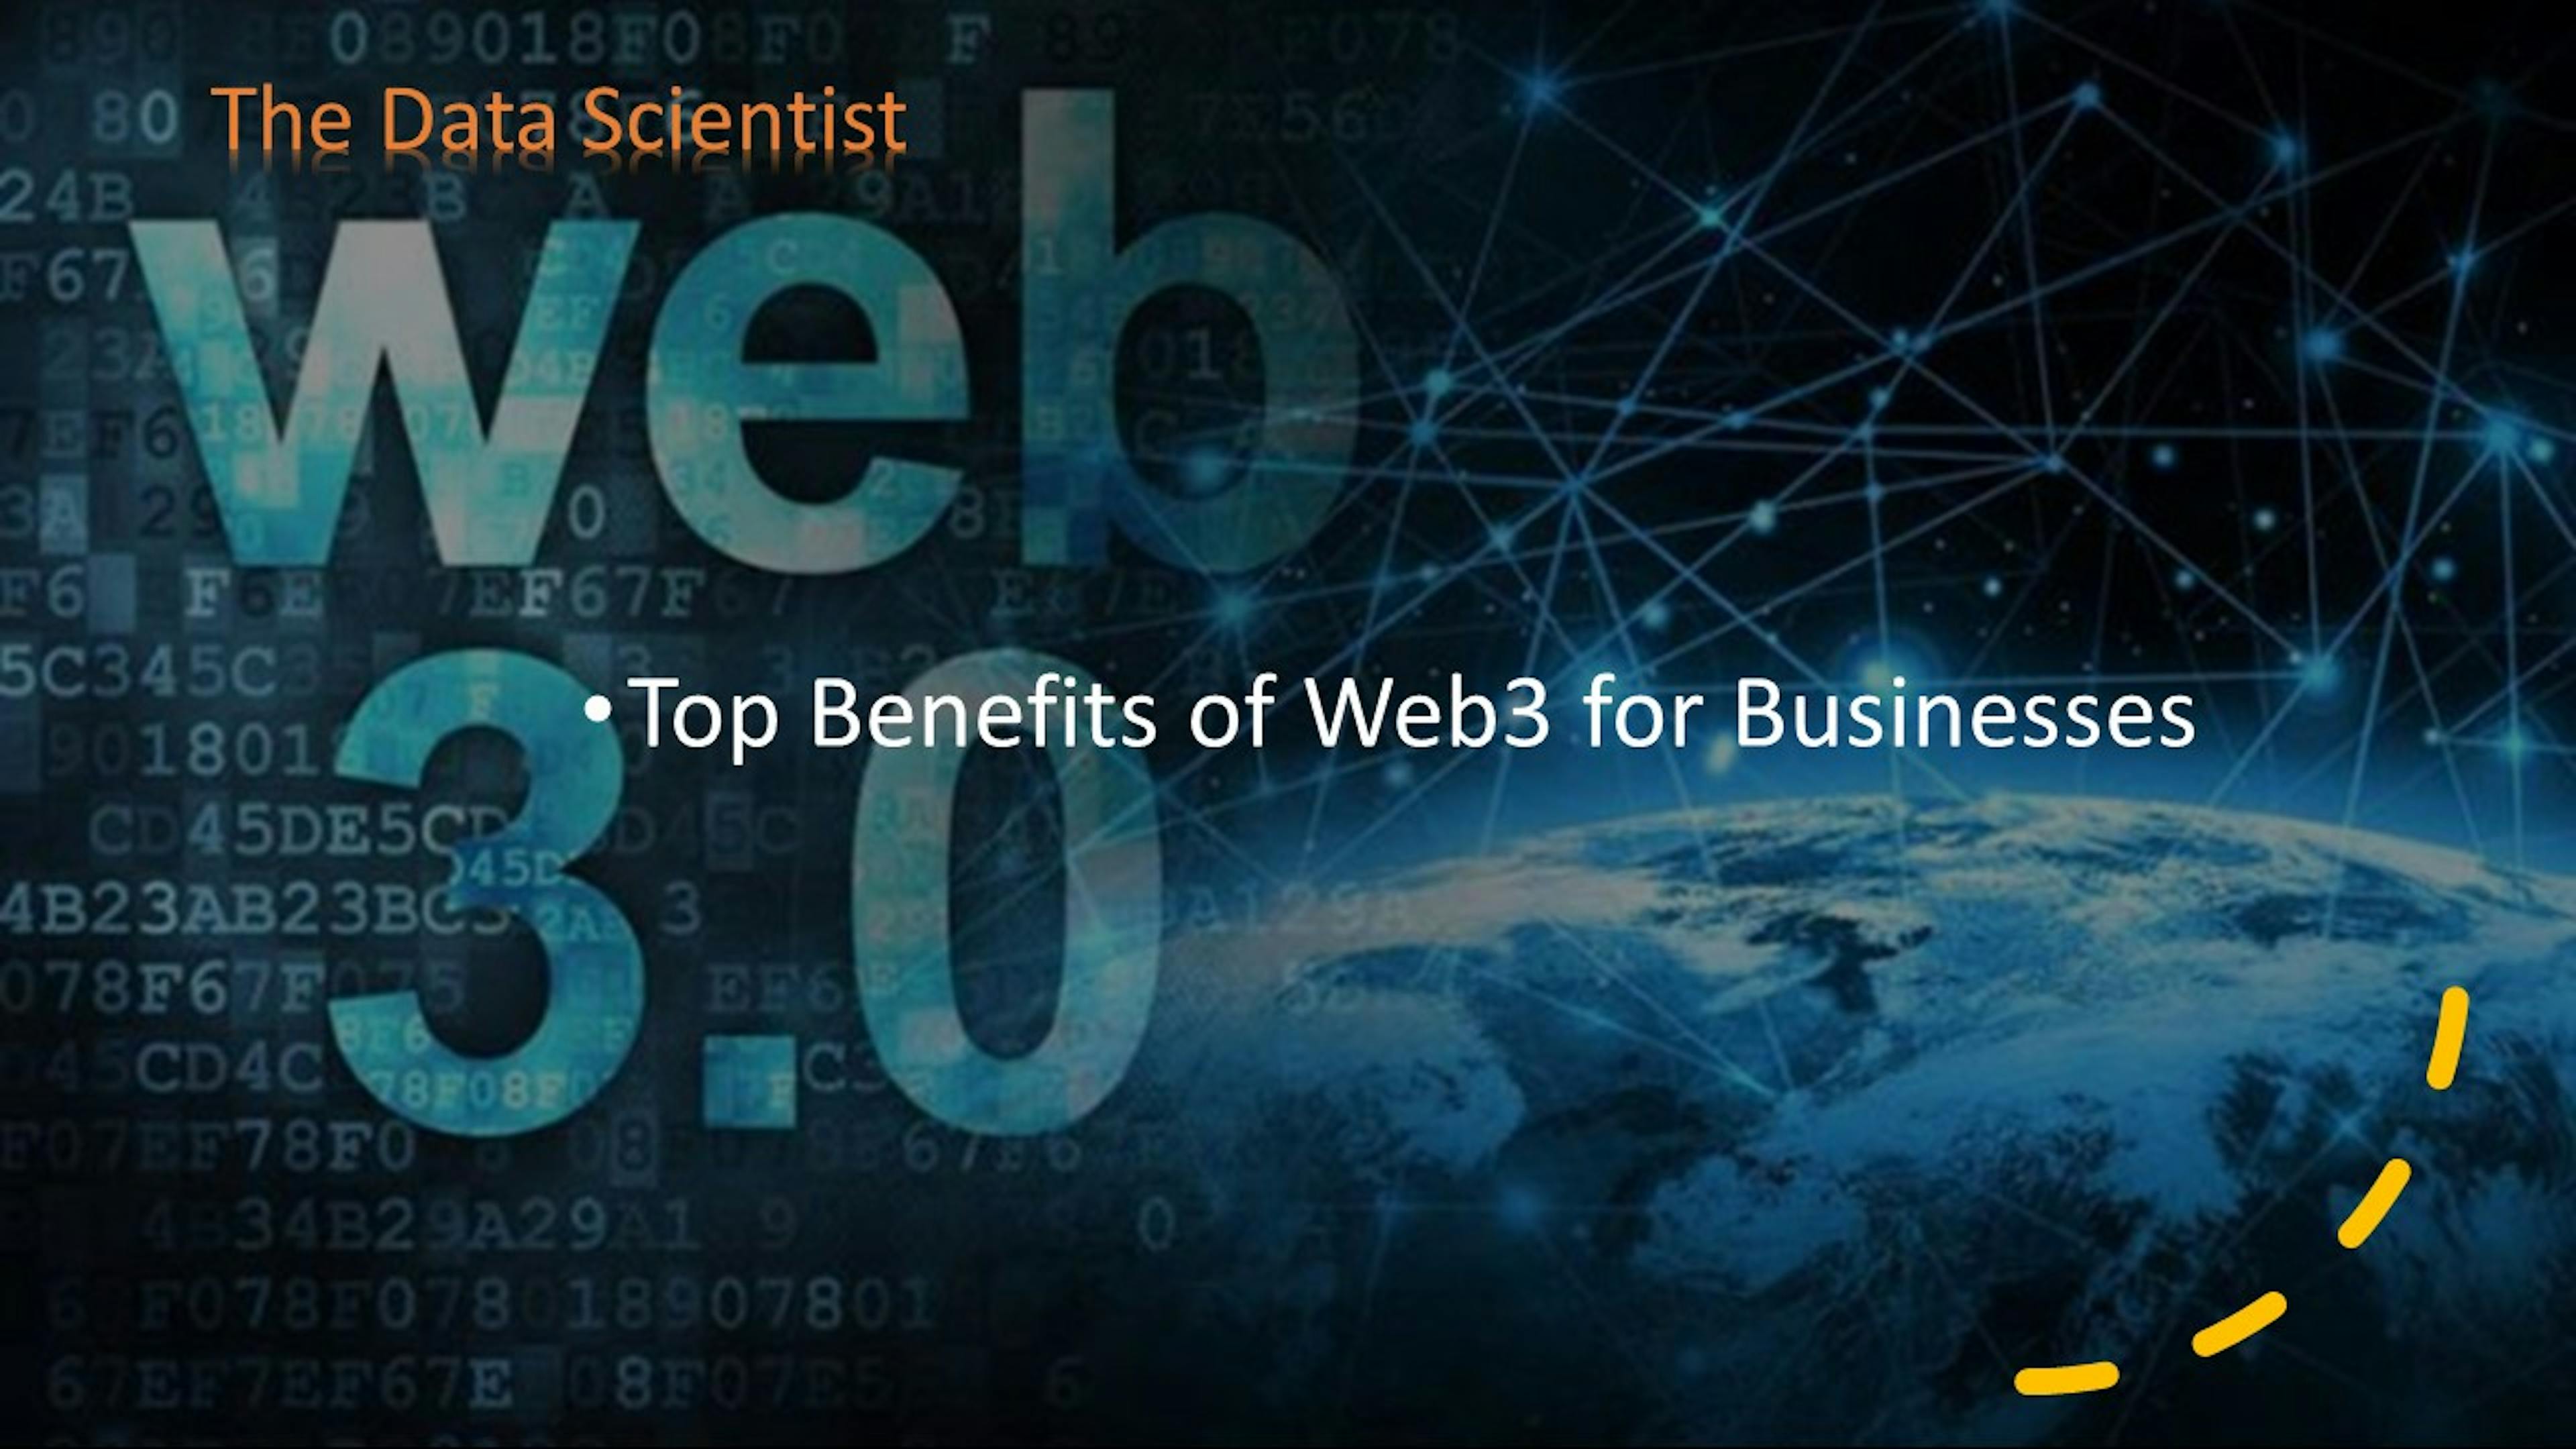 Discover how you can maximise Web3 in your business and daily lives